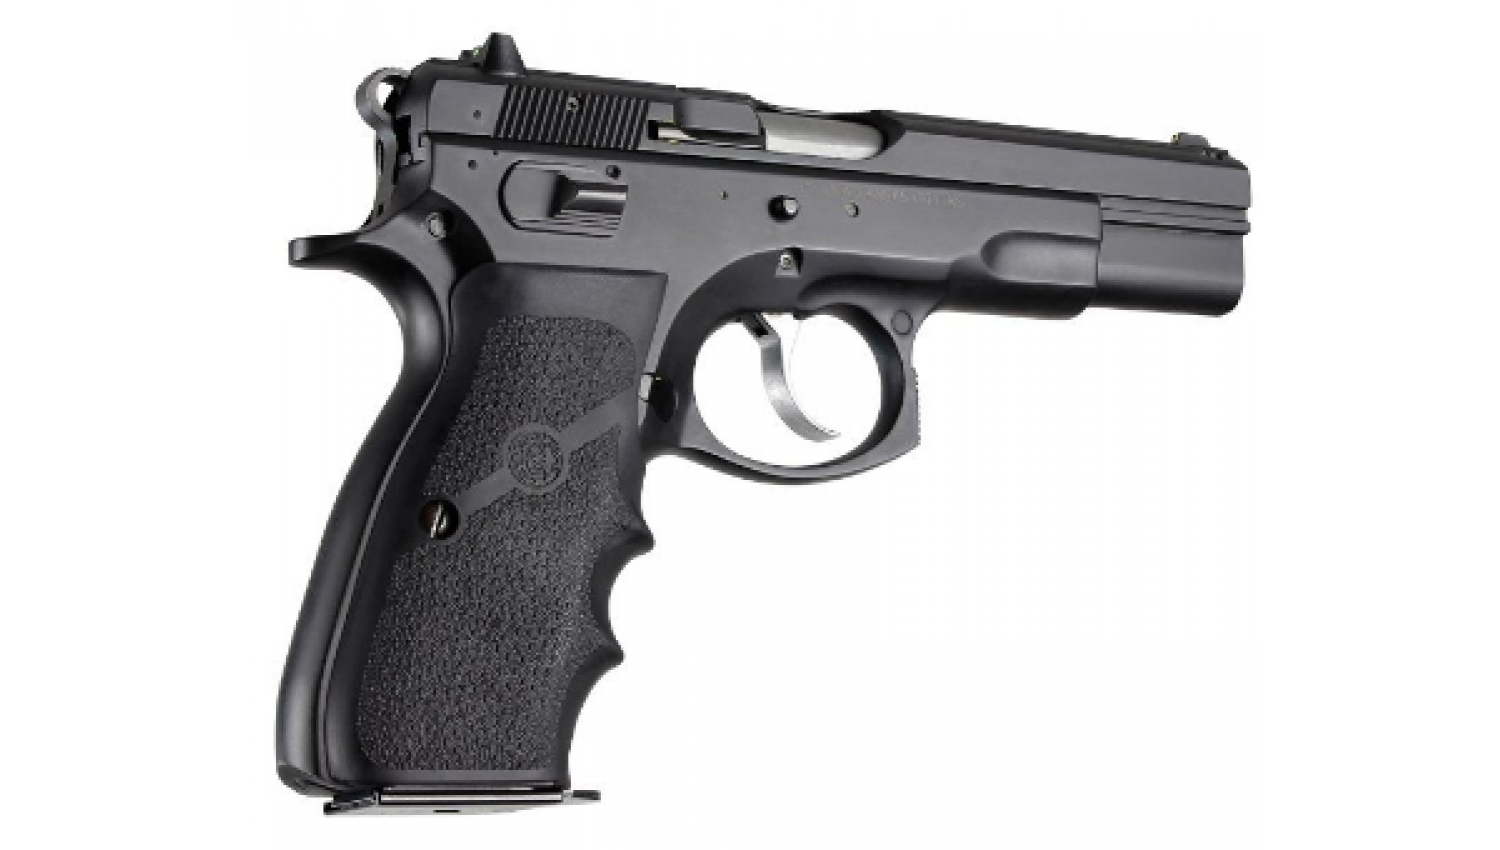 Hogue CZ-75 Rubber Wraparound Grip - With Finger Grooves.